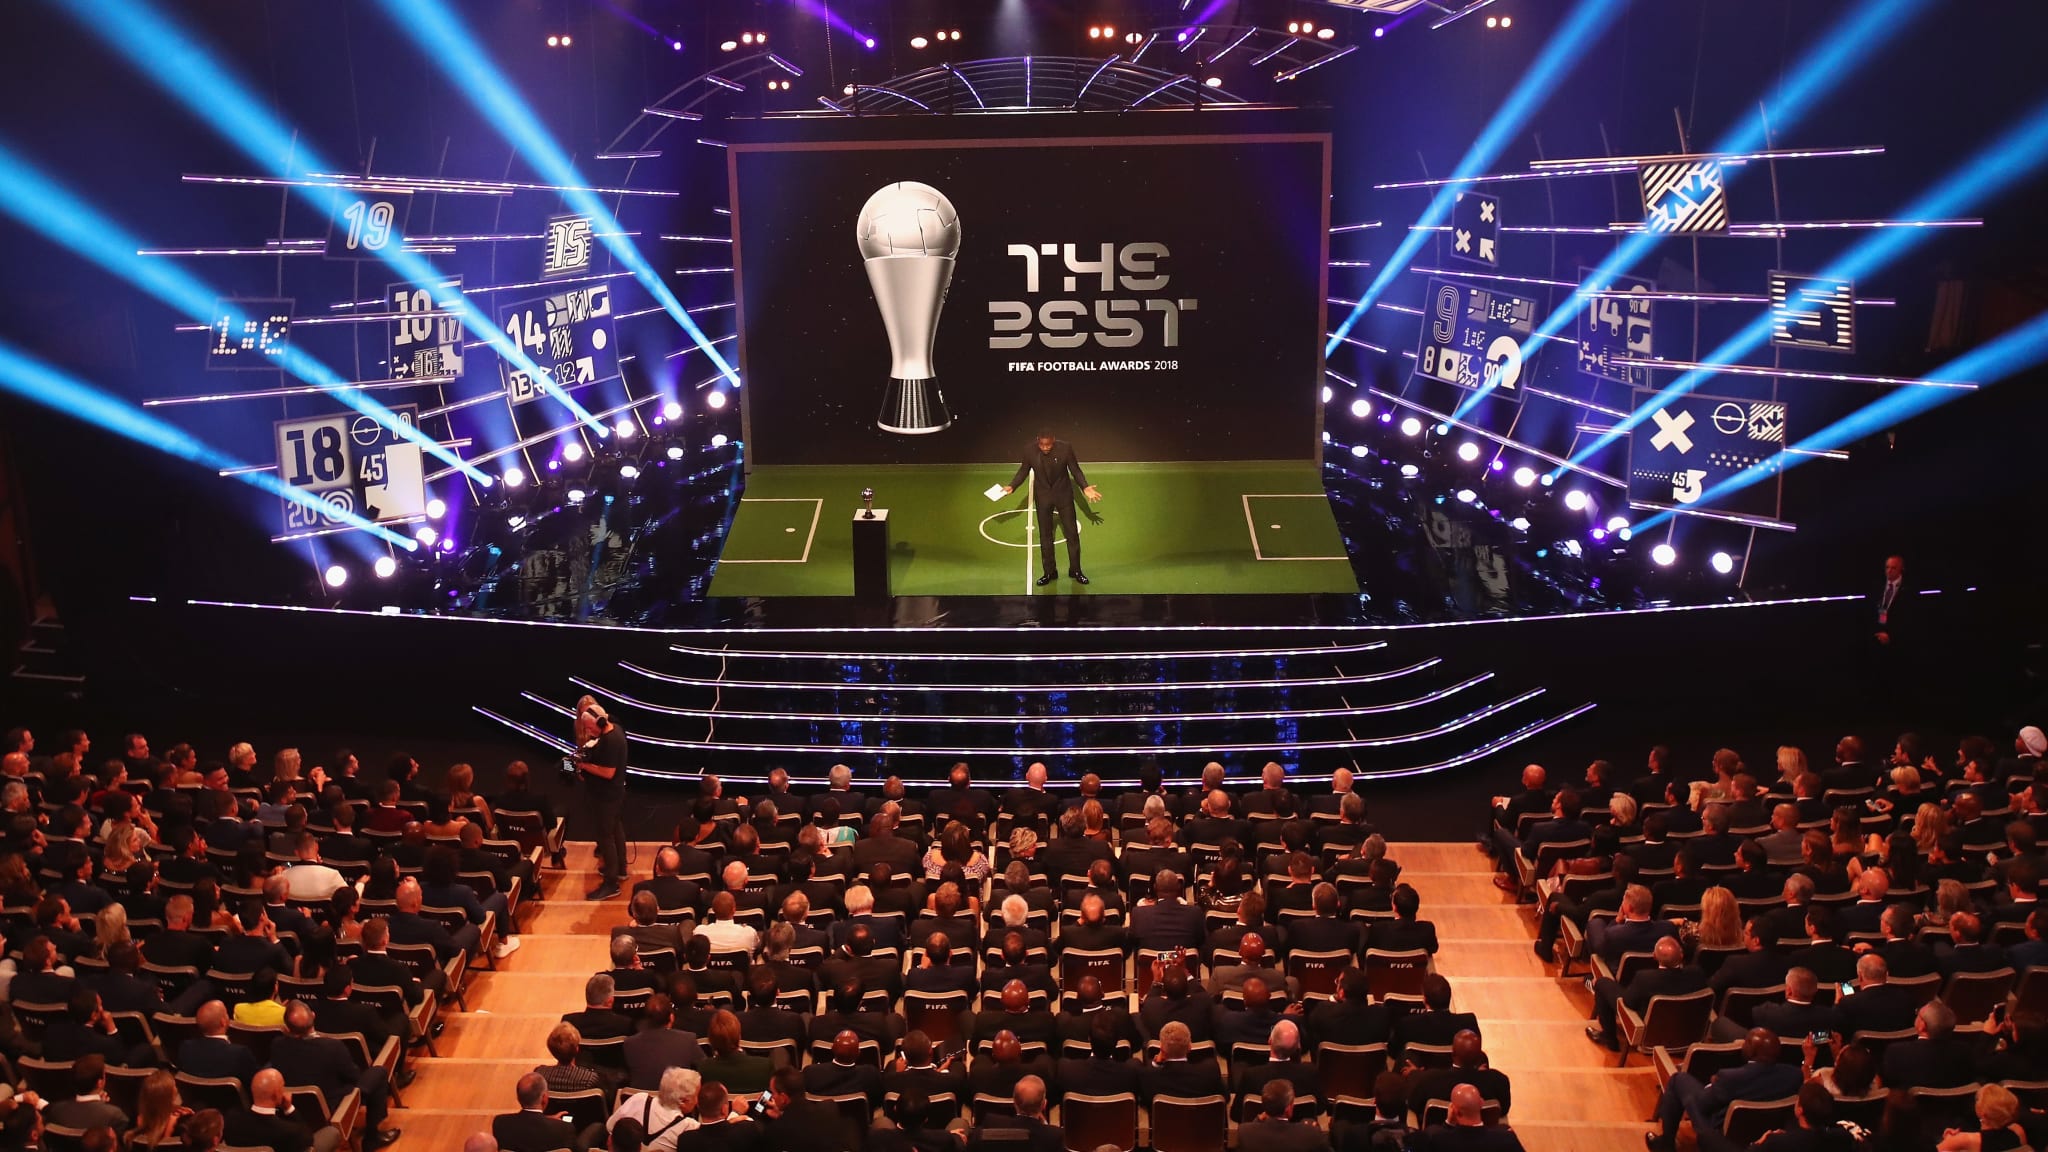 🔥 Download The Best Fifa Football Awards by agreene36 Awarding